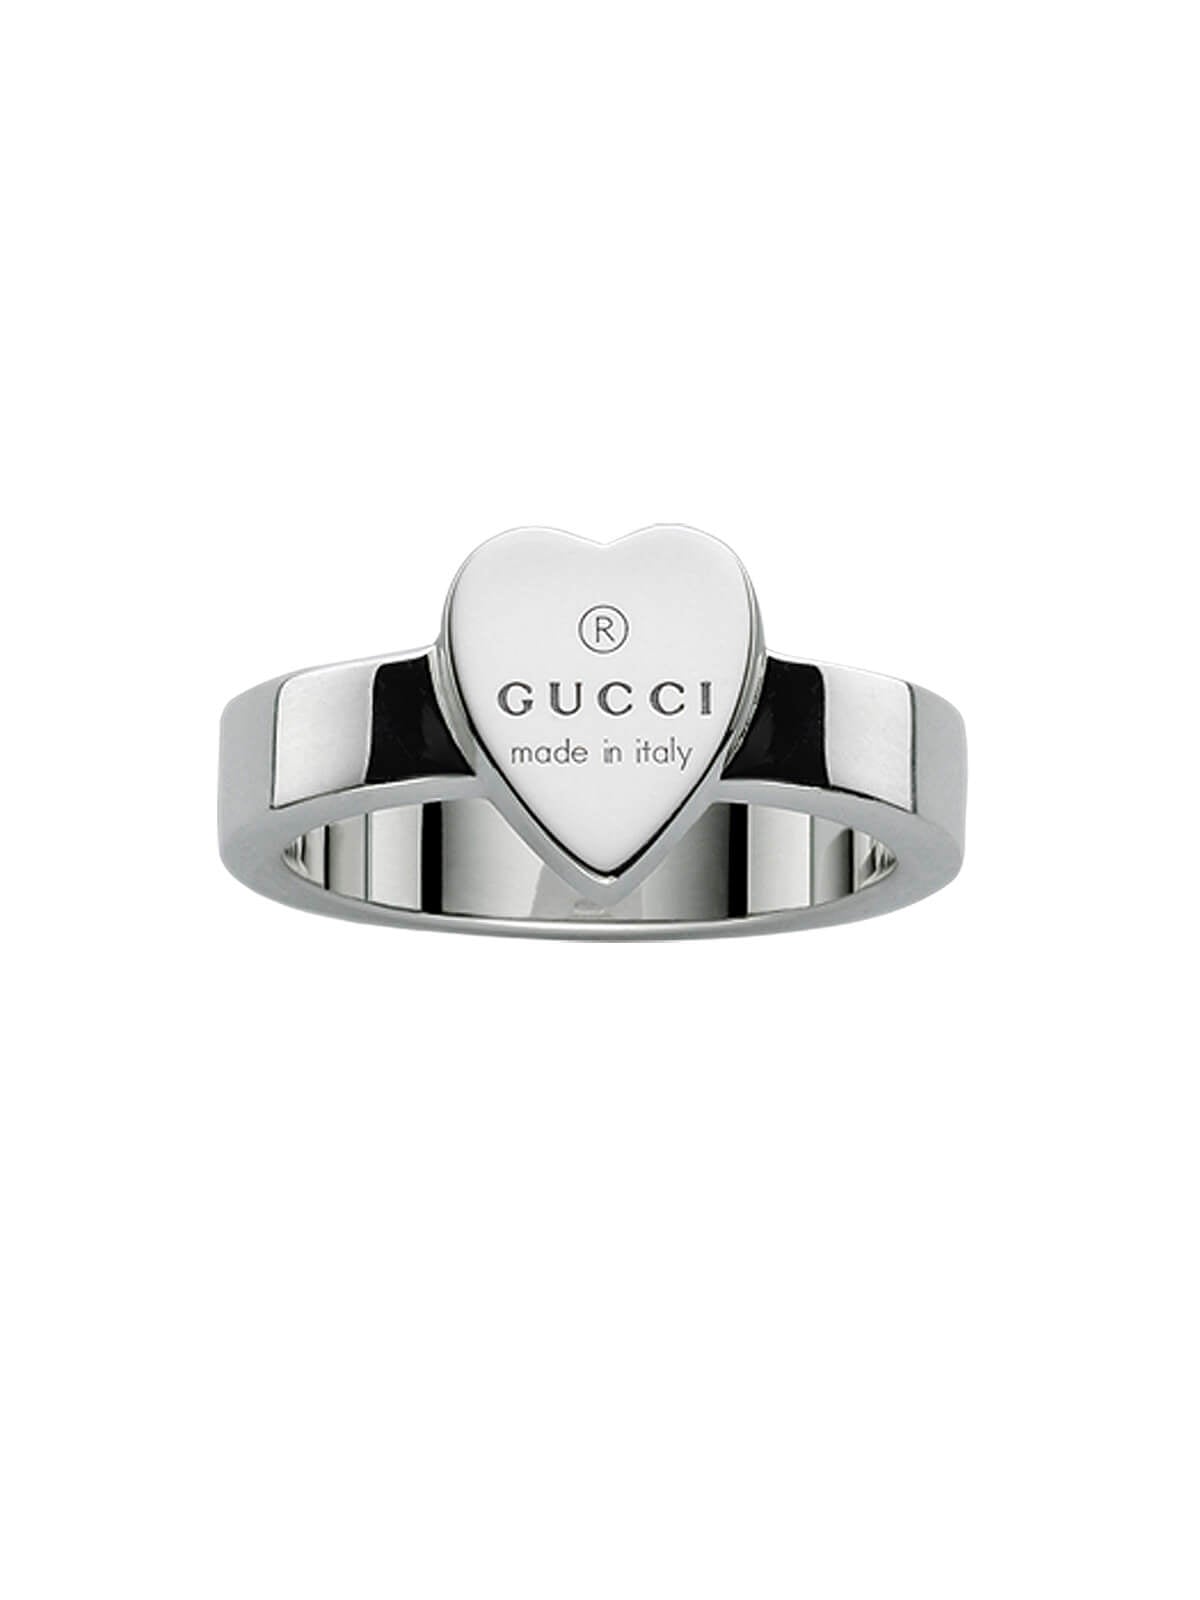 Gucci Trademark Heart Ring in Silver - Size 11